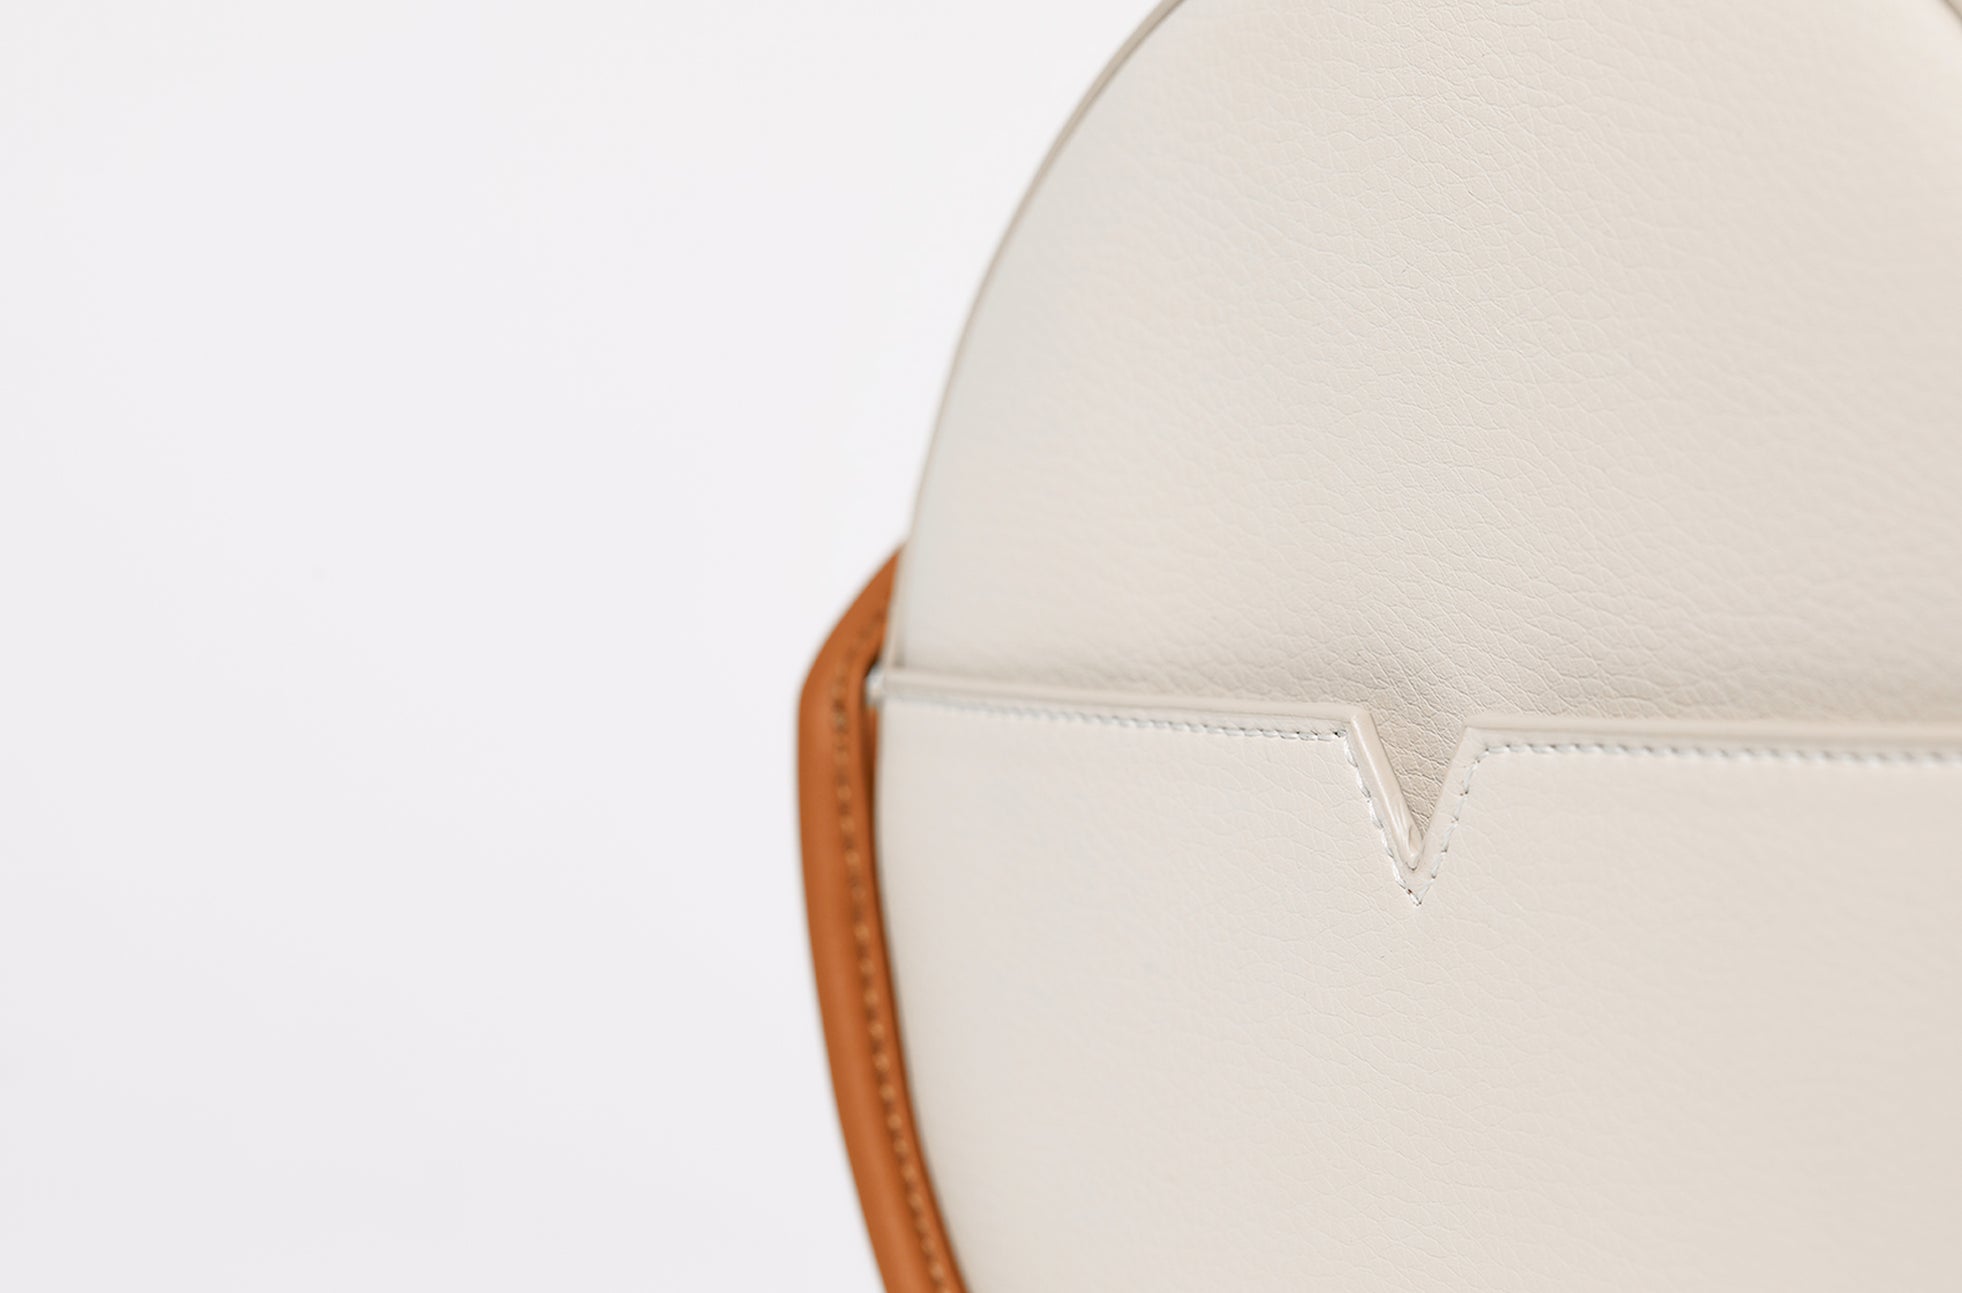 The Circle Crossbody in Banbū Leather in Oat image 8